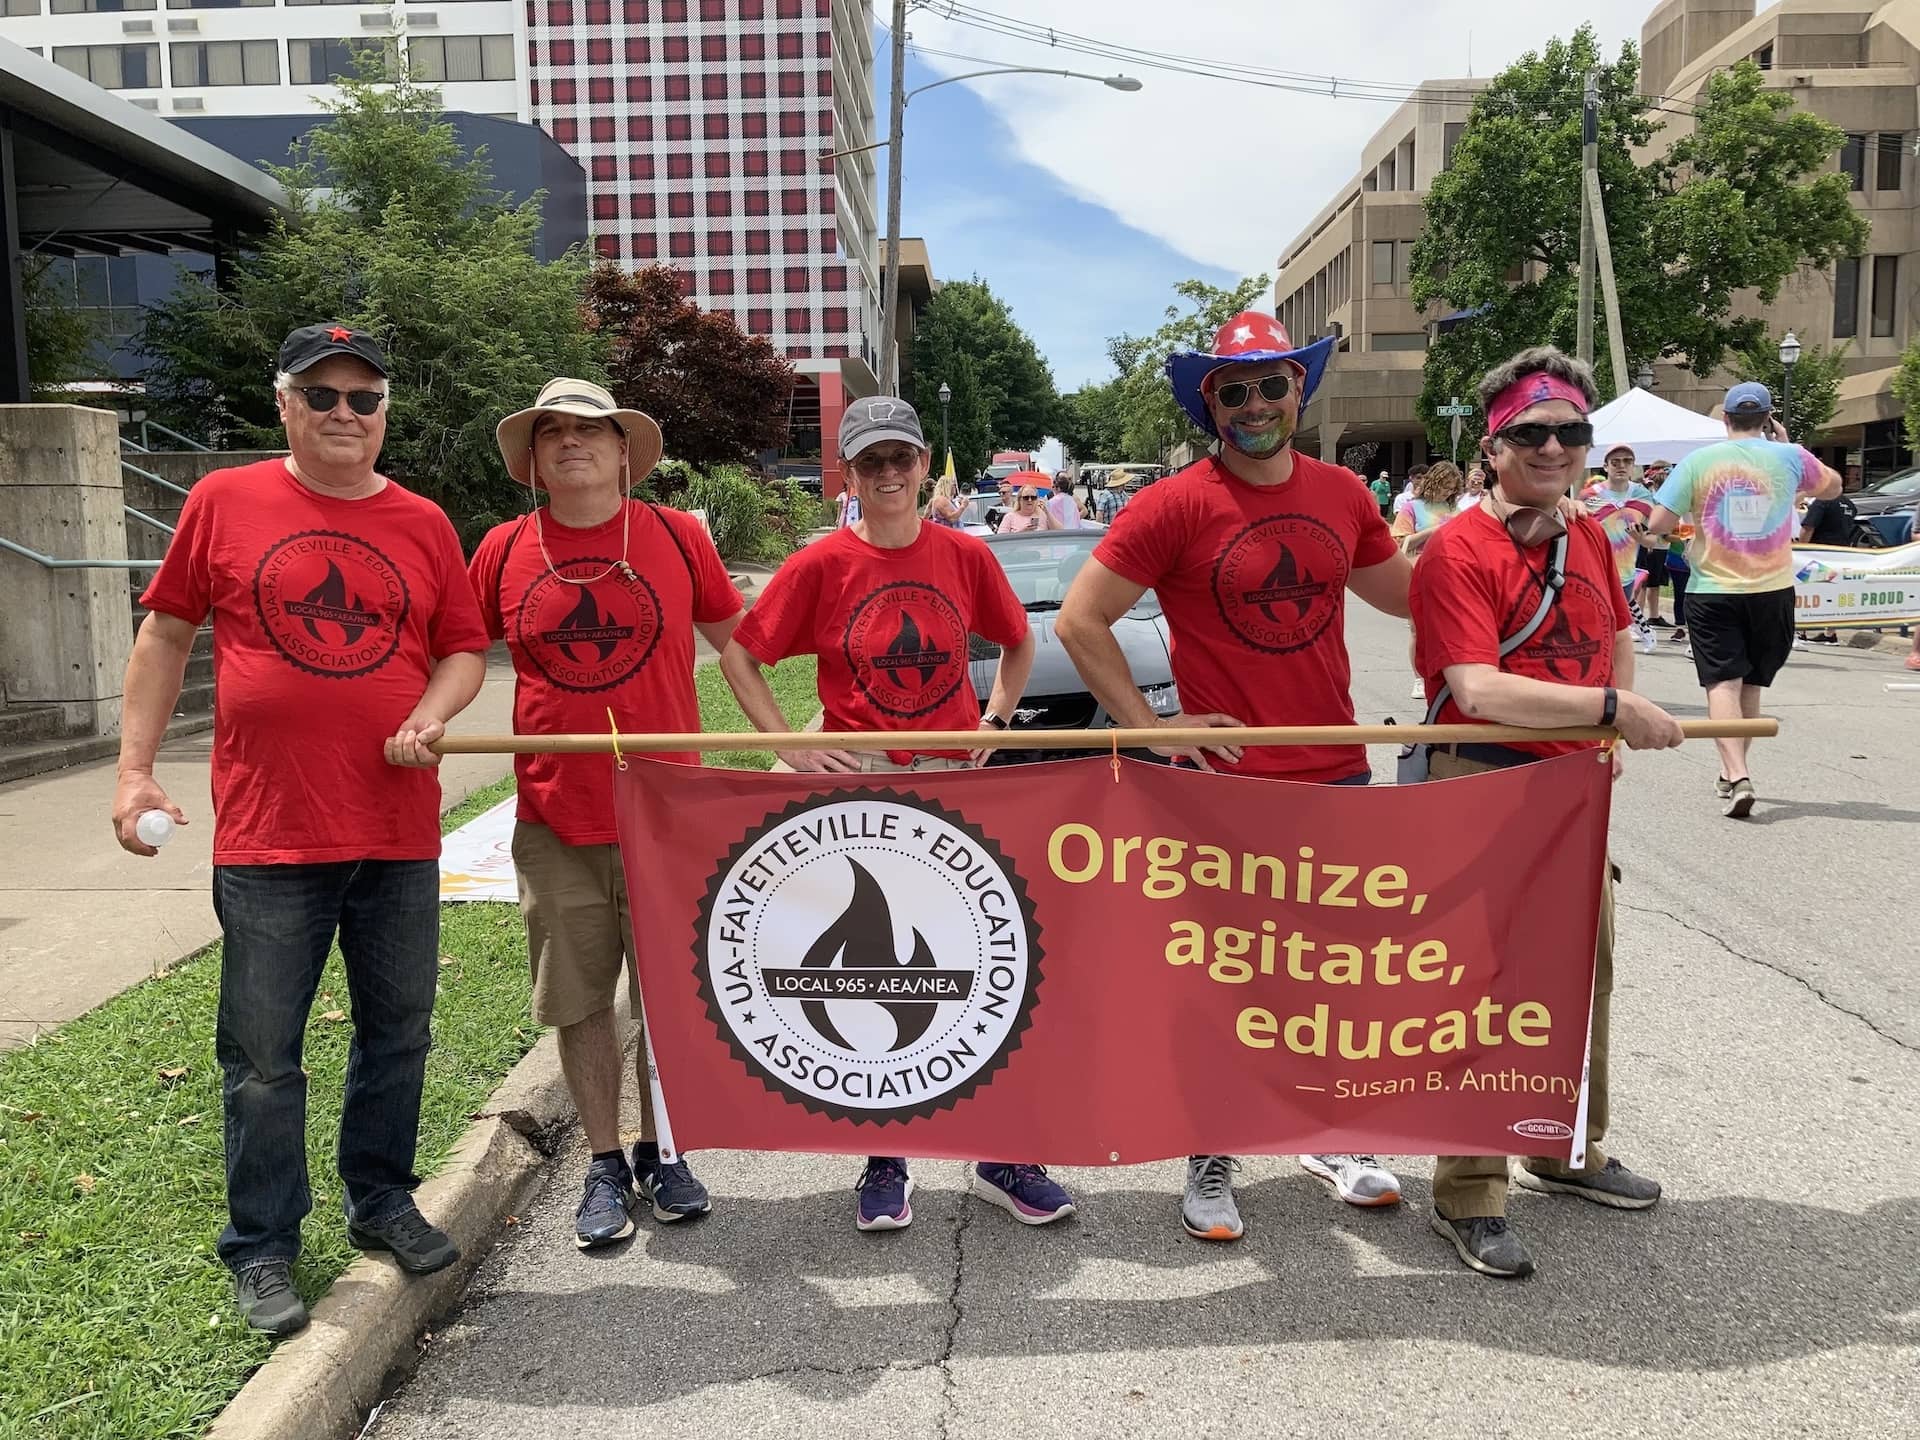 Local 965 members Ted Swedenburg, Mike Pierce, Tricia Starks, Bret Schulte and Ben Pollock form up June 26, 2021, shortly before the start of the 17th annual Northwest Arkansas Pride Parade in Fayetteville.